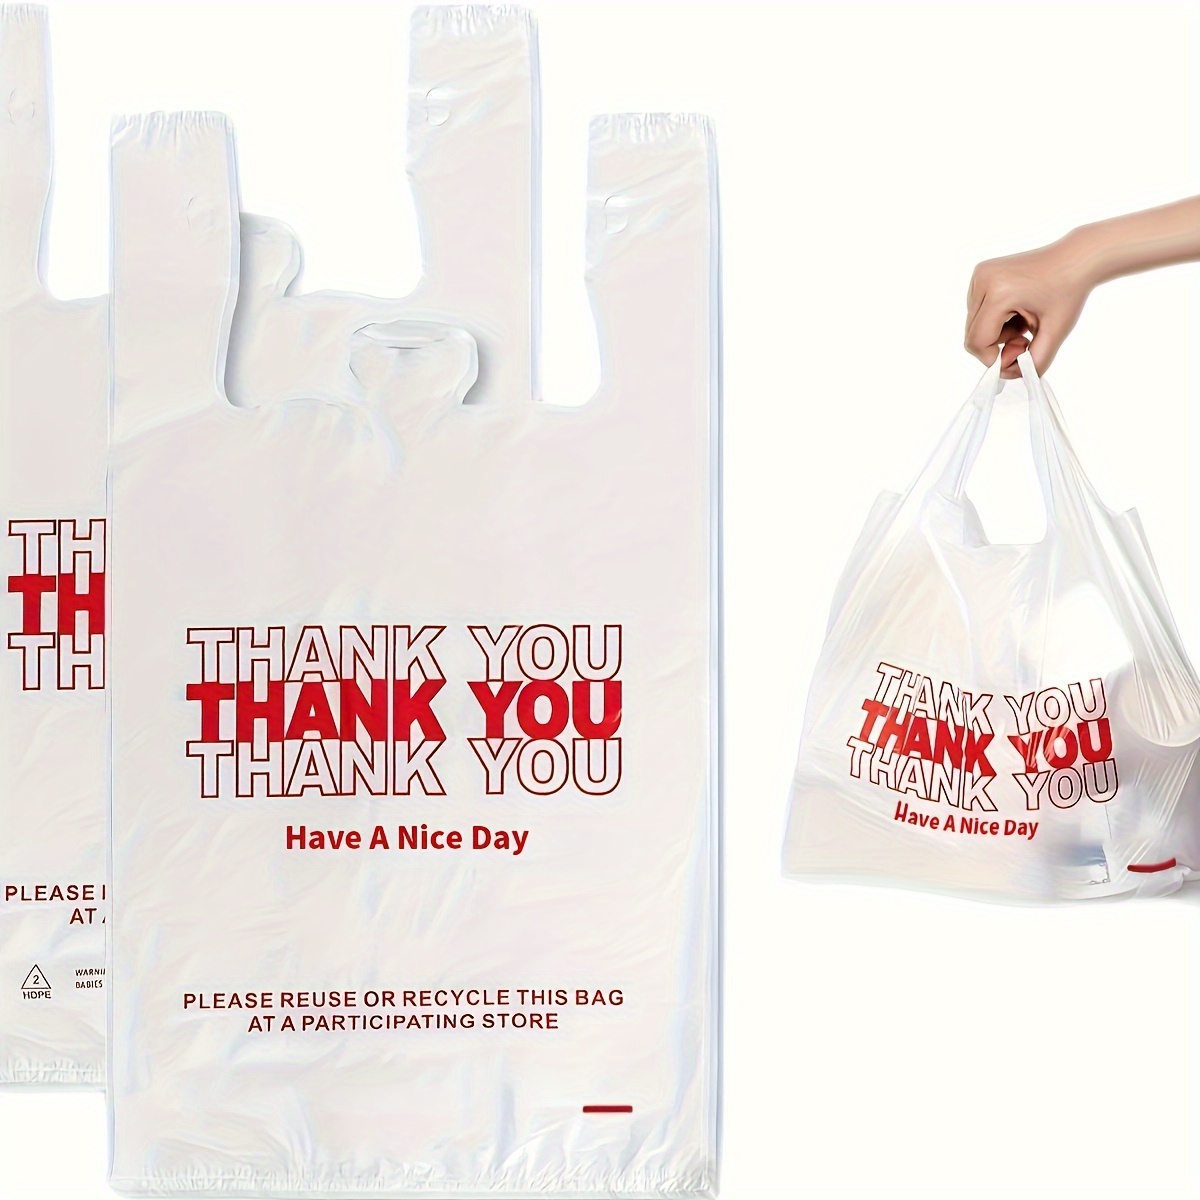 

Value Pack 50pcs Plastic Bags With Handles, Plastic Bags, Grocery Bags, Convenient Bags, Catering Gift Packaging, Plastic Restaurant Bags, Shopping Bags, Goods Bags, Bulk Takeout Bags For Shops